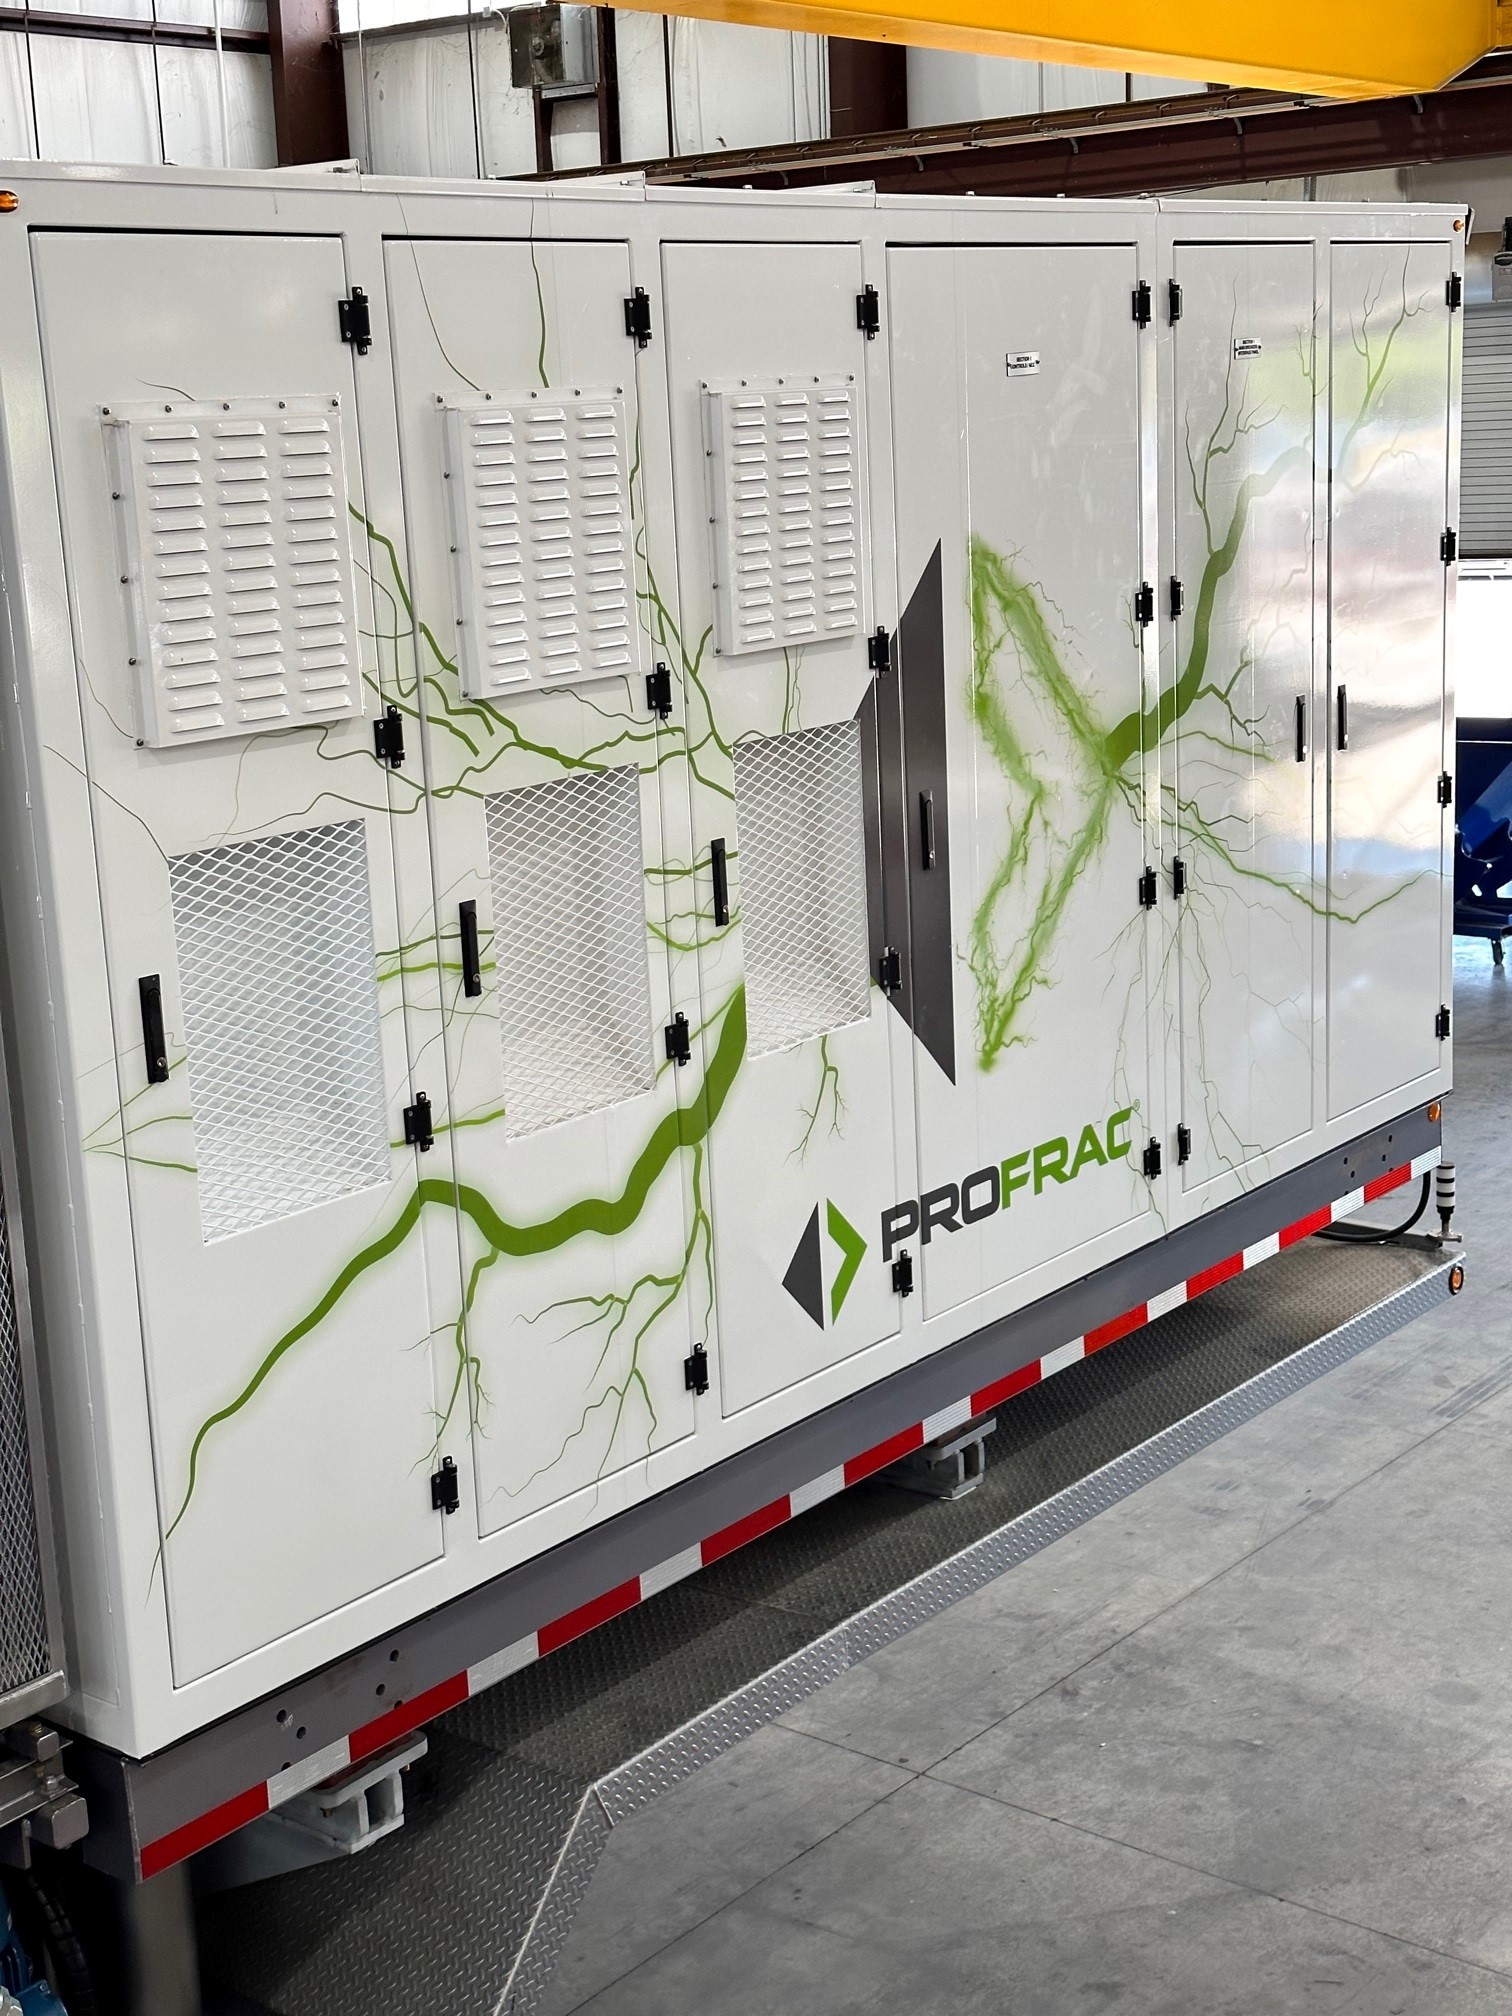 Vinyl wrapped generator with green lightning and the profrac logo.